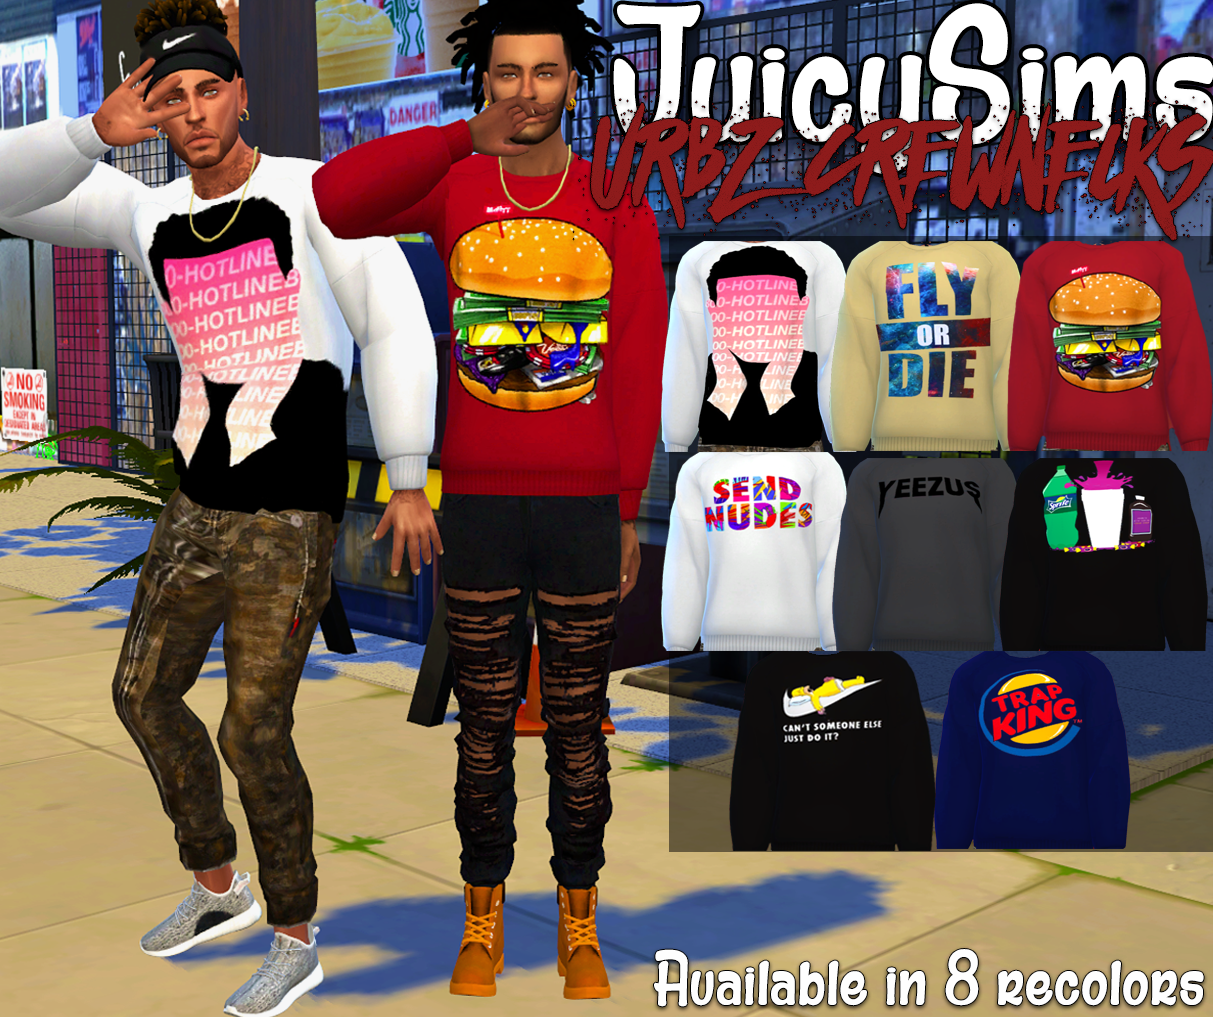 TS4 - Urbz Crewnecks8 RecolorsHomme Custom ThumbnailRequires MeshTOUDon’t claim as your ownDon’t re-uploadTag “juicysims” if used so I can see :)ENJOY! | Download *Must download mesh found here